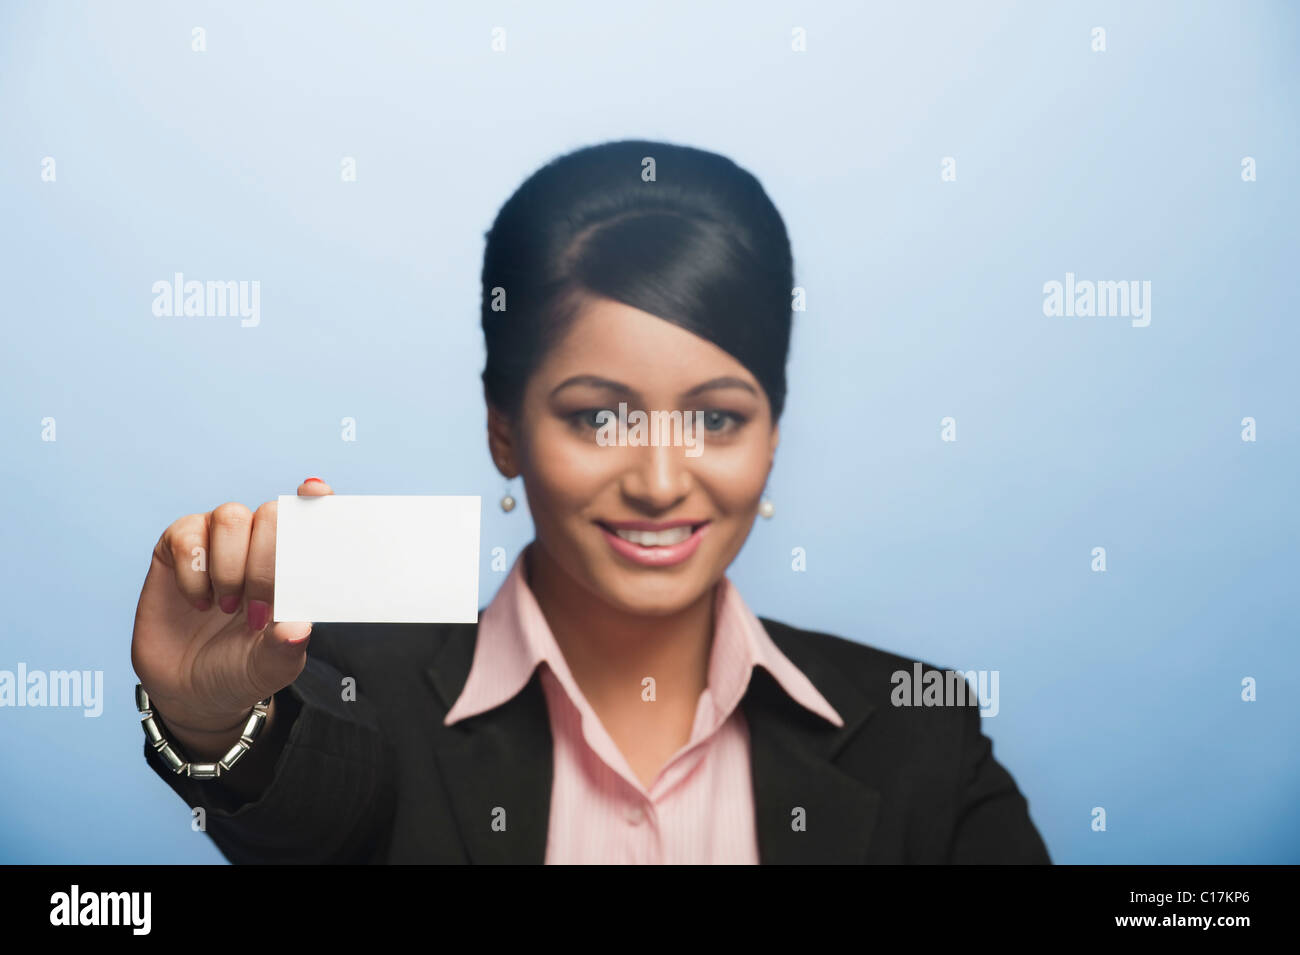 Portrait of a businesswoman holding a blank card Stock Photo